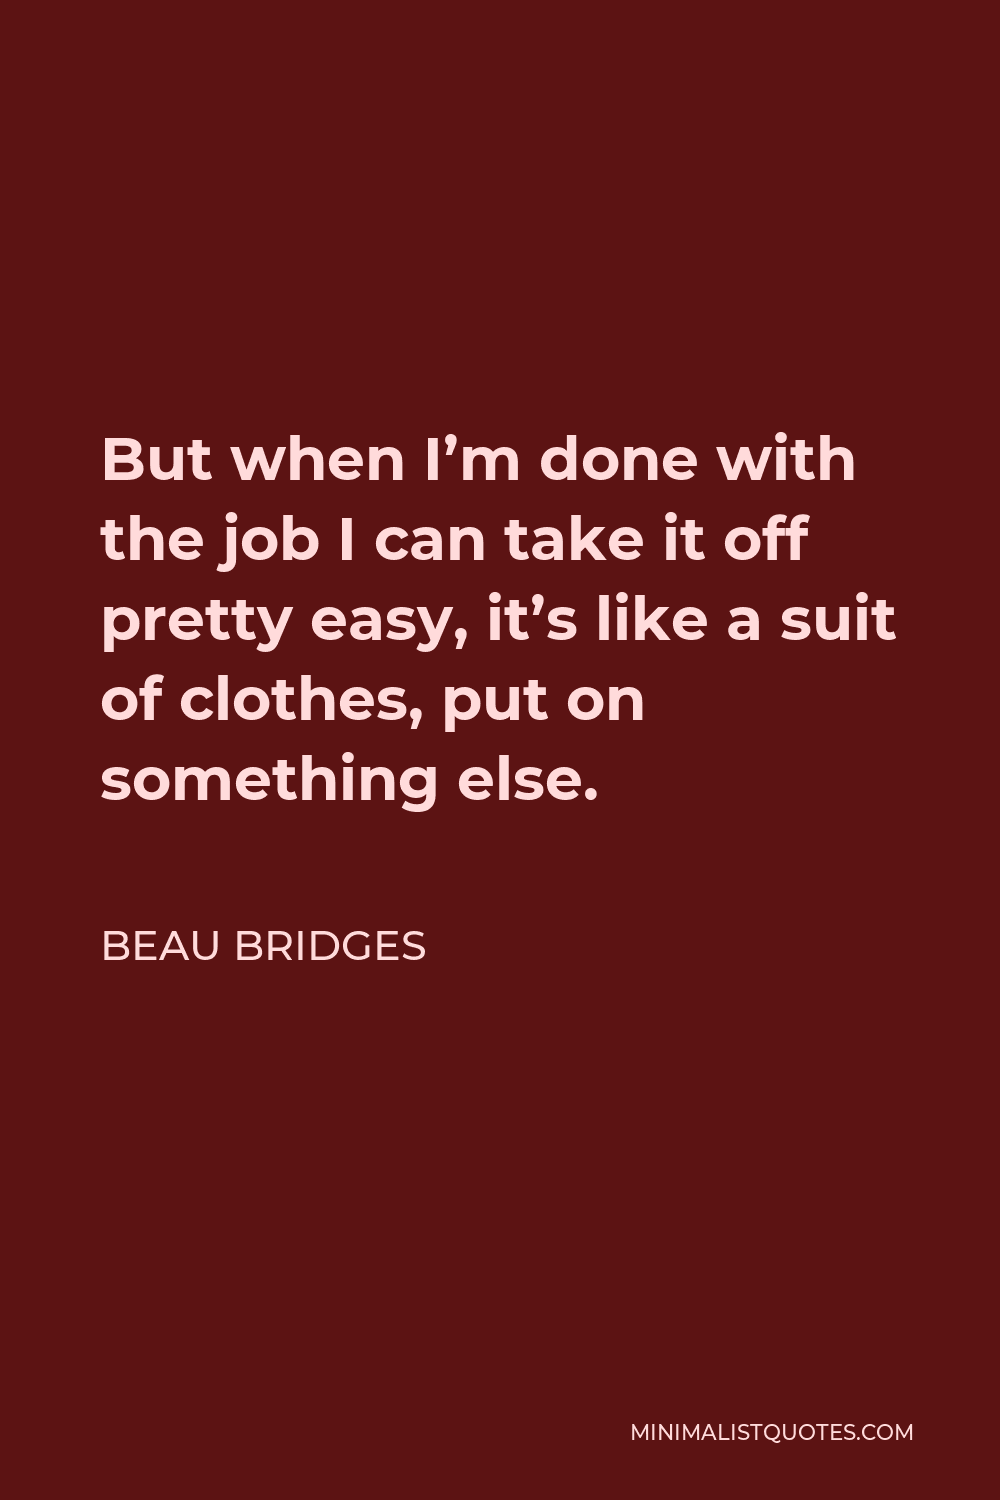 Beau Bridges Quote - But when I’m done with the job I can take it off pretty easy, it’s like a suit of clothes, put on something else.